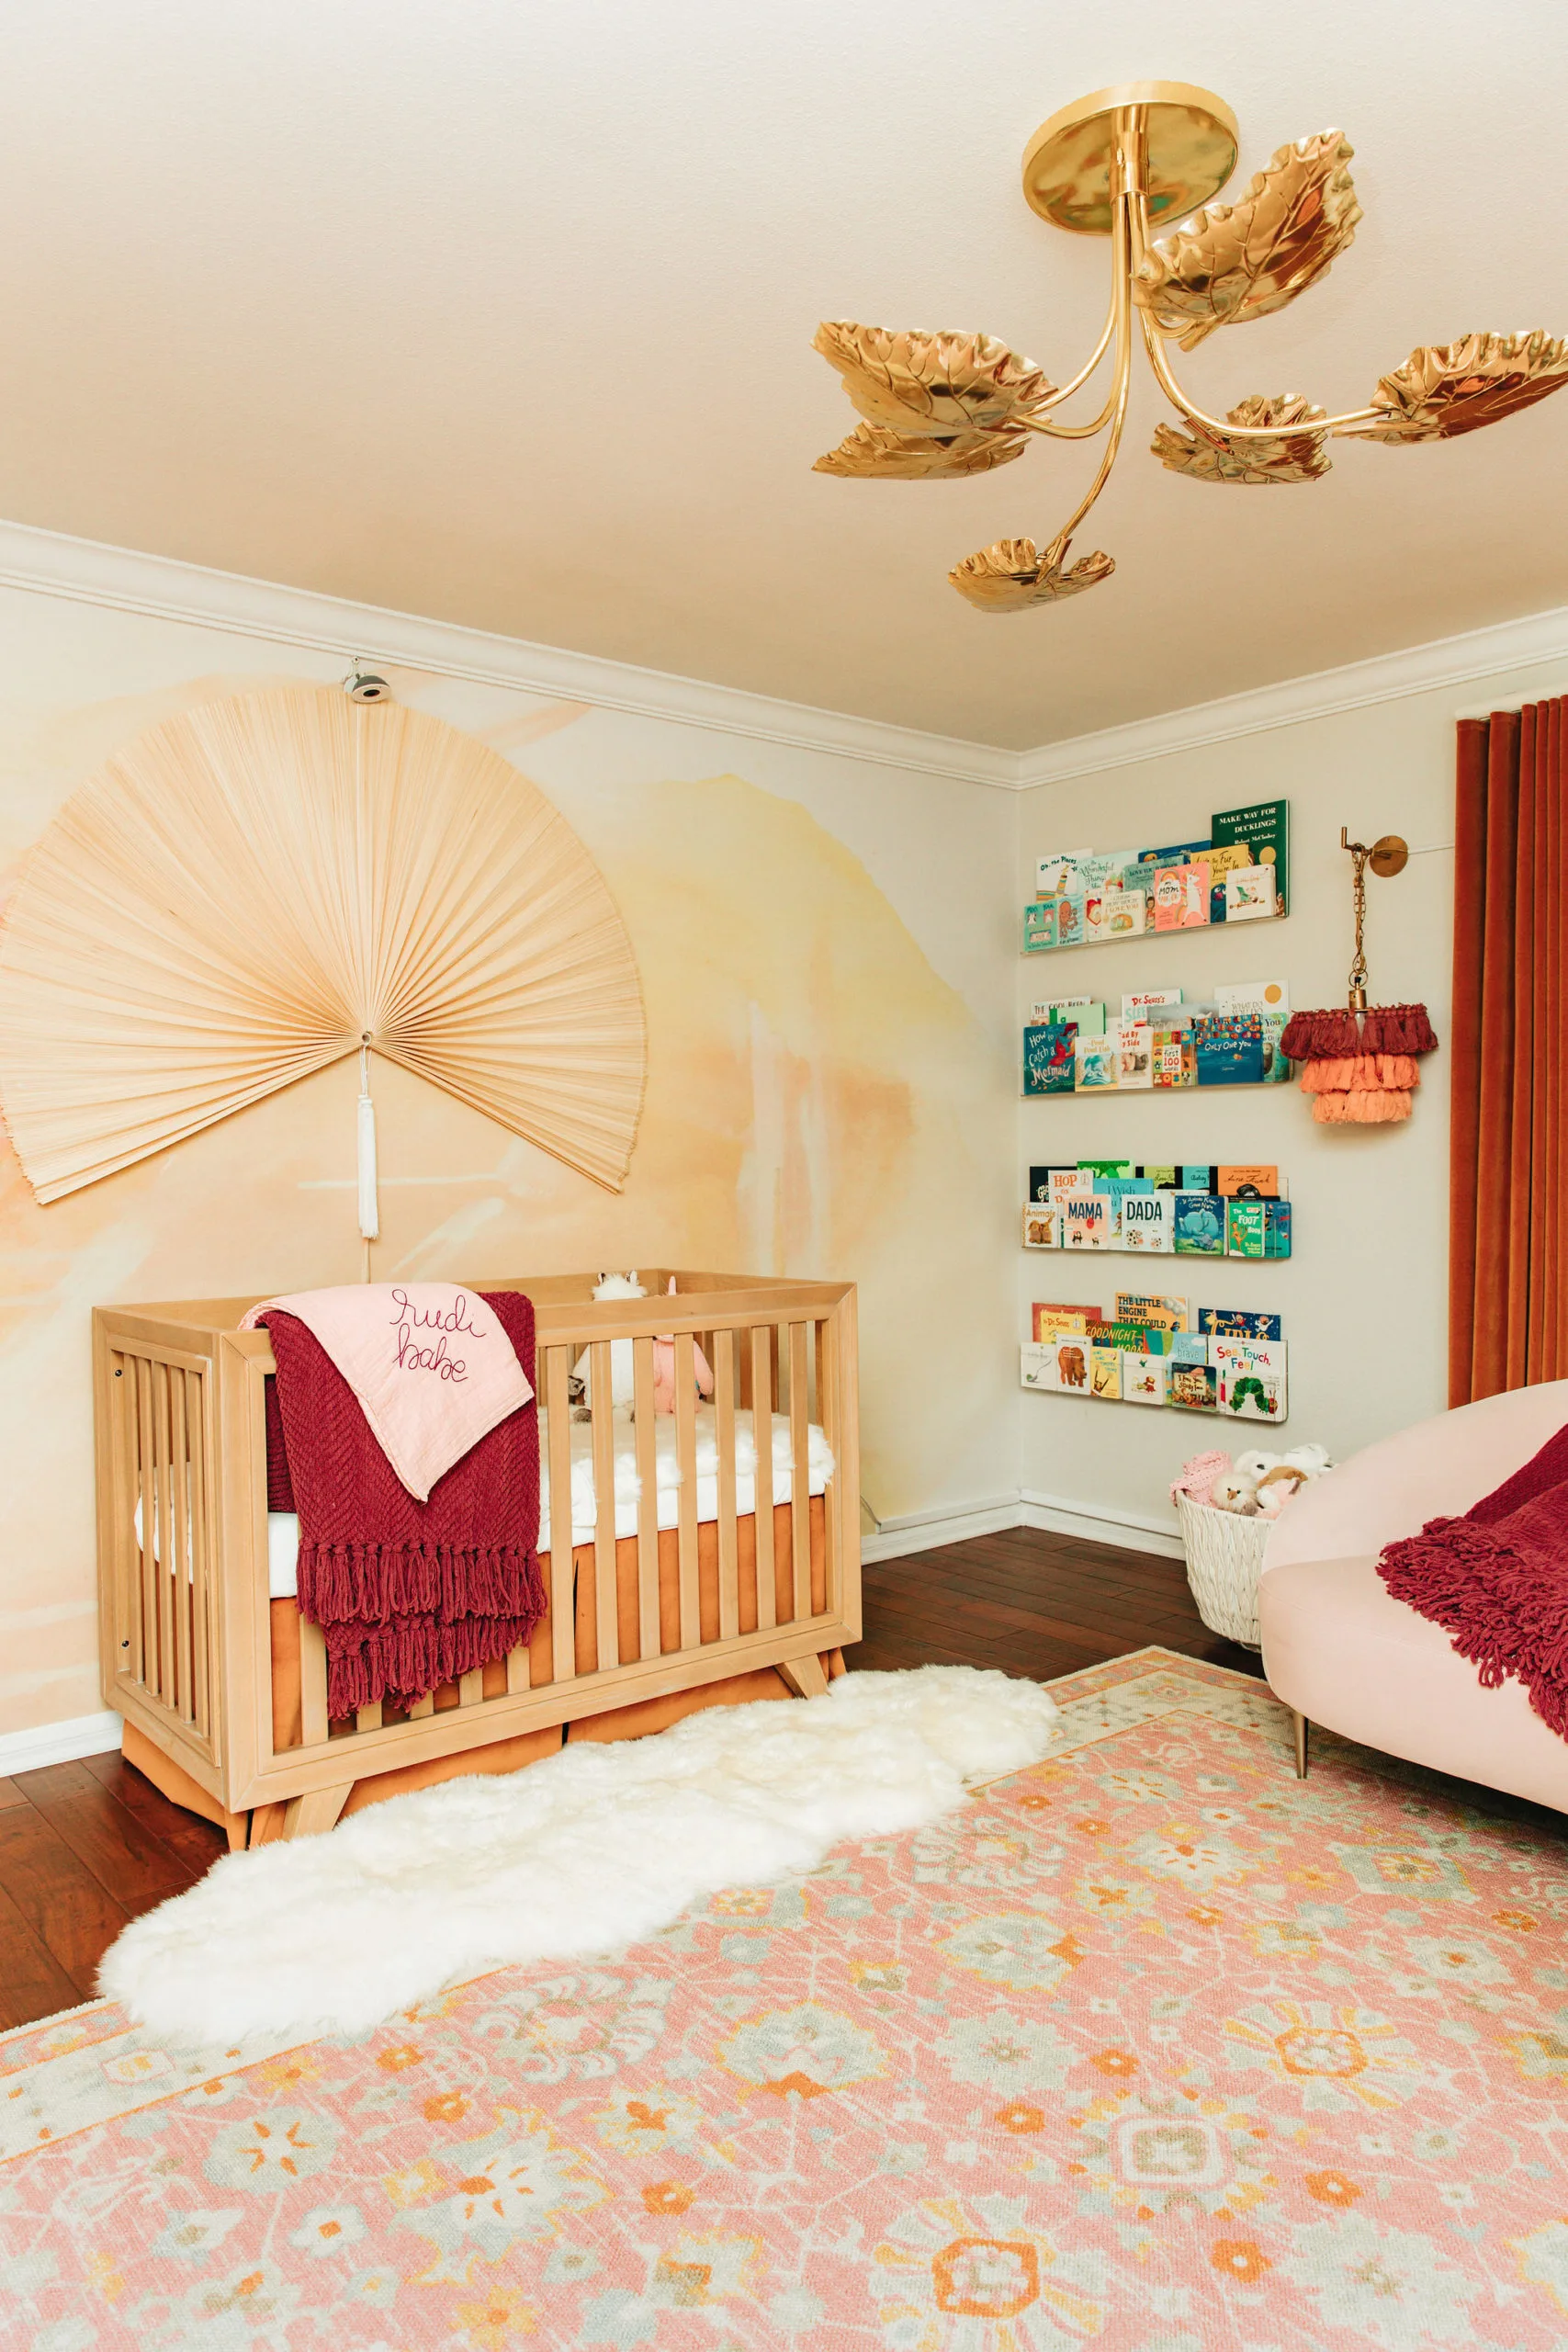 Fan Over Natural Wooster Crib with Abstract Sunrise Wallpaper